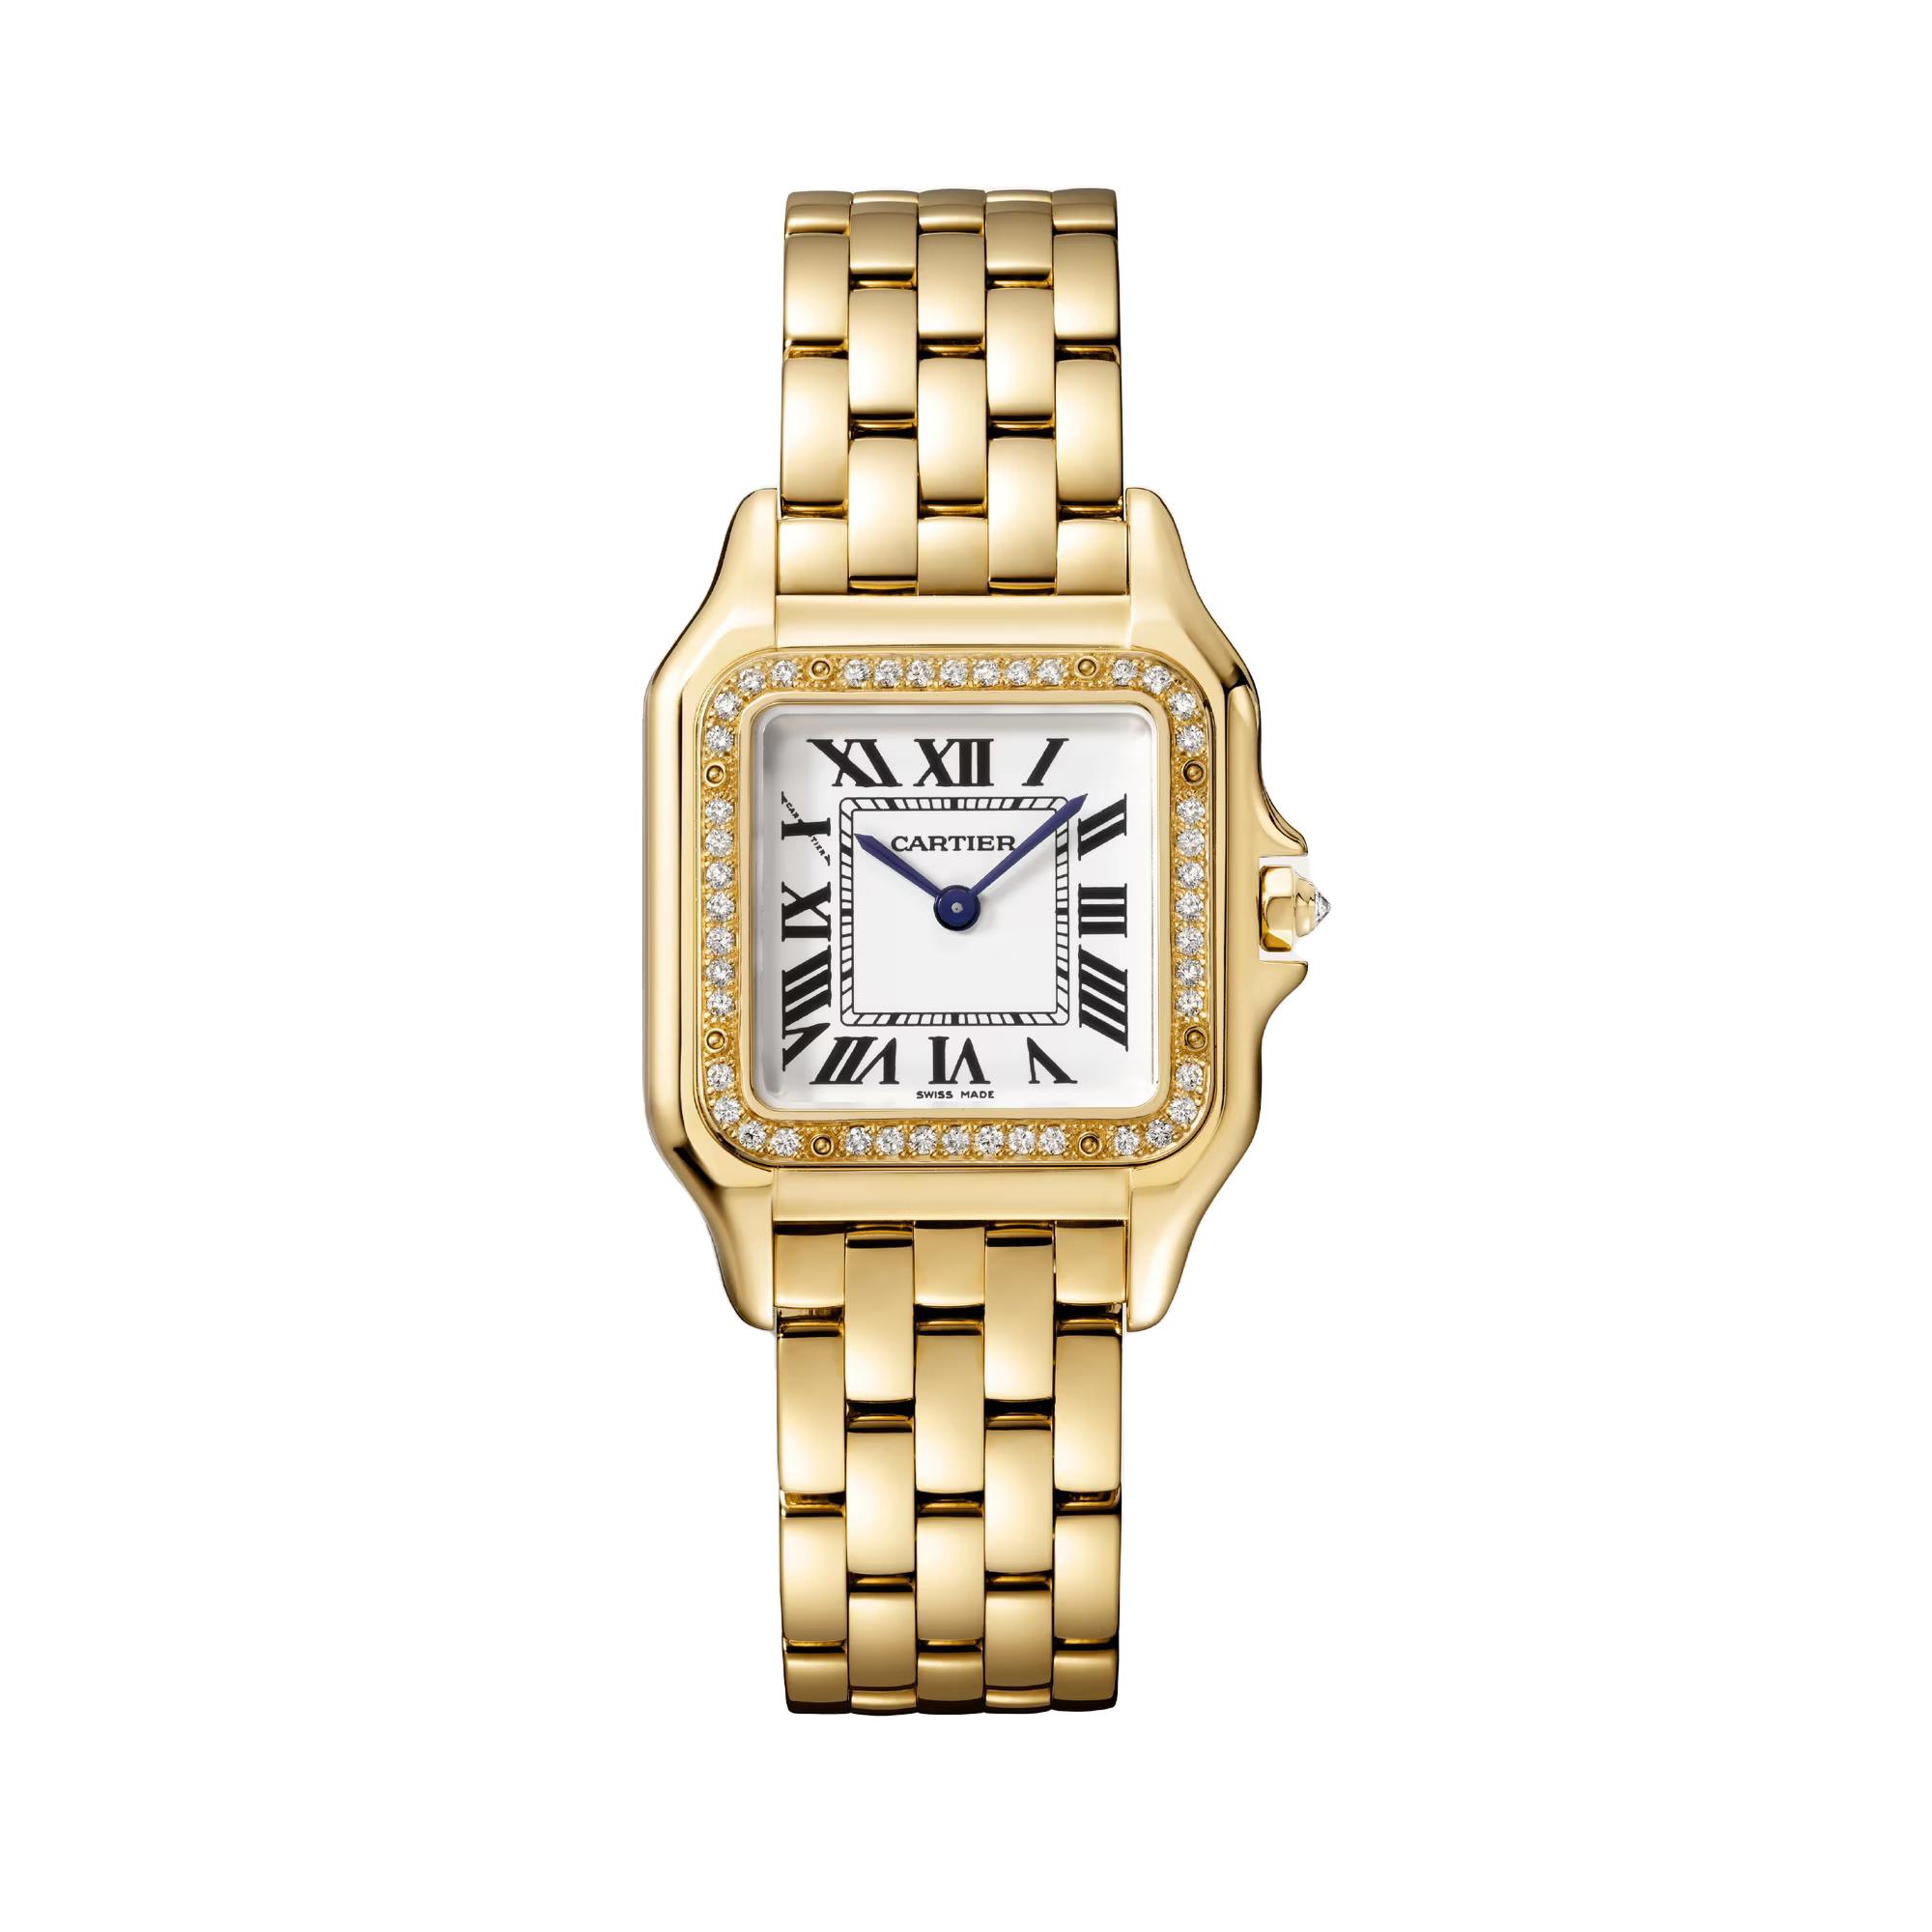 Panthere de Cartier Watch in Yellow Gold with Diamonds, size medium